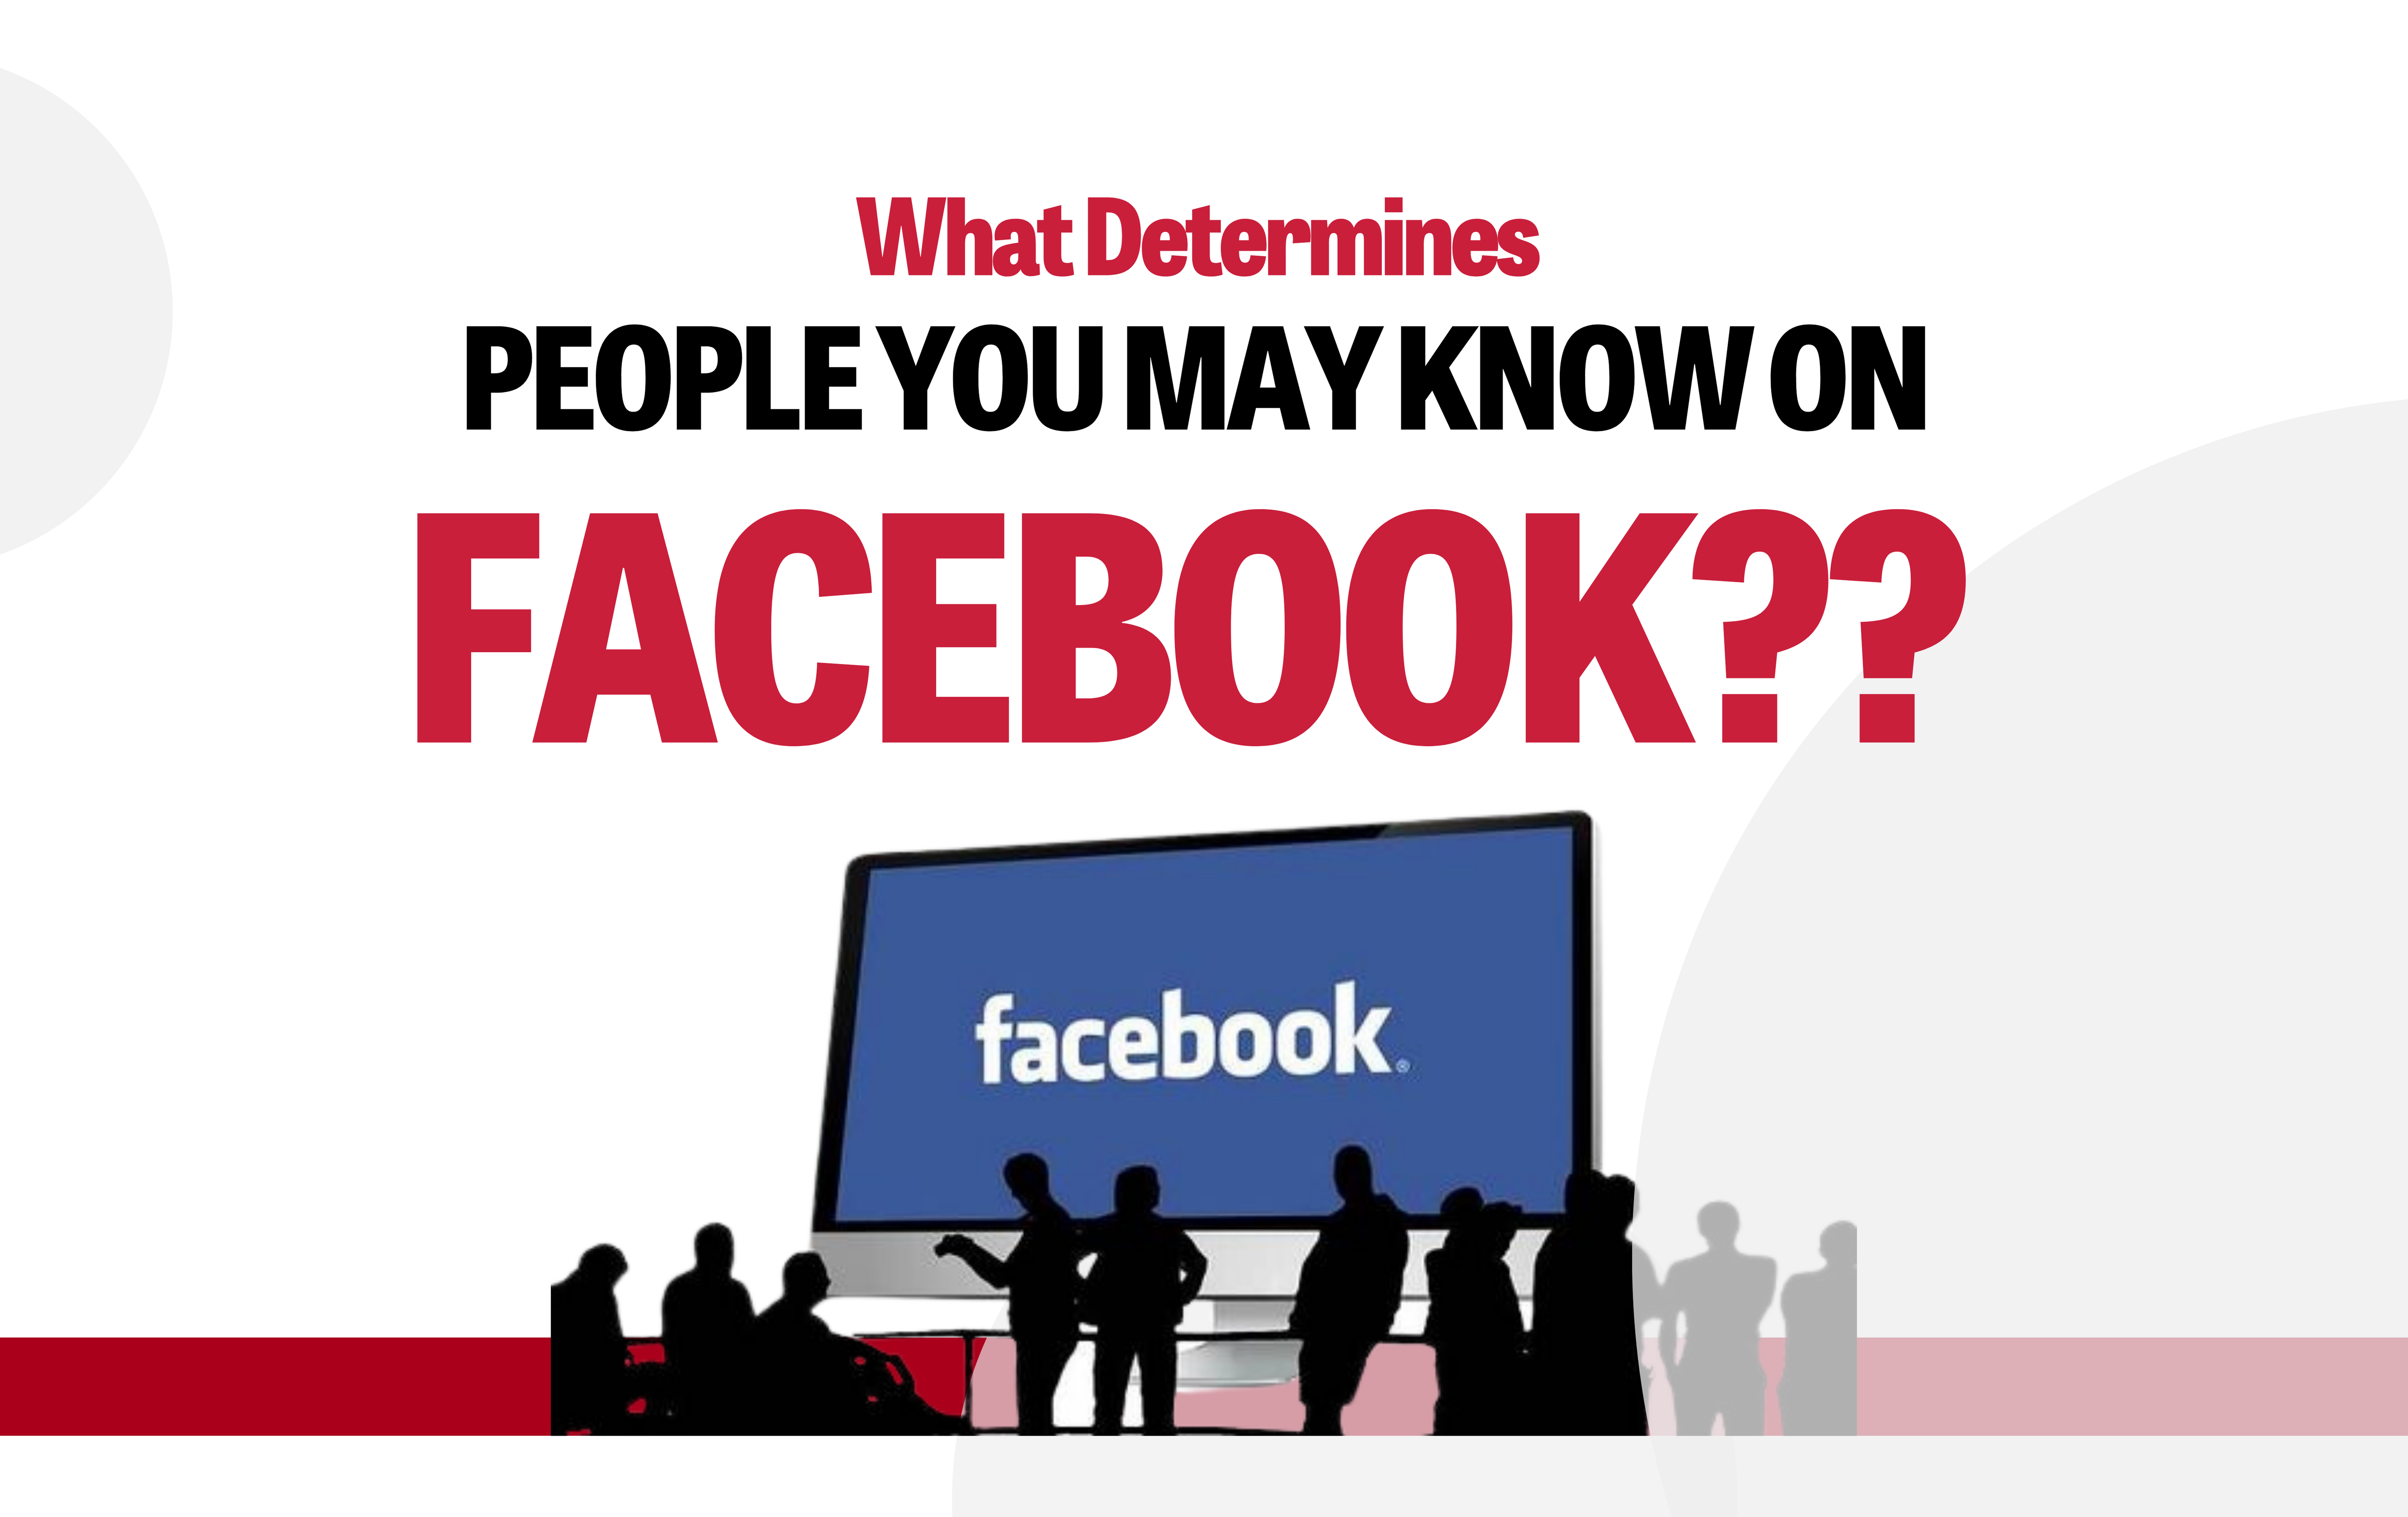 What Determines People You May Know on Facebook?